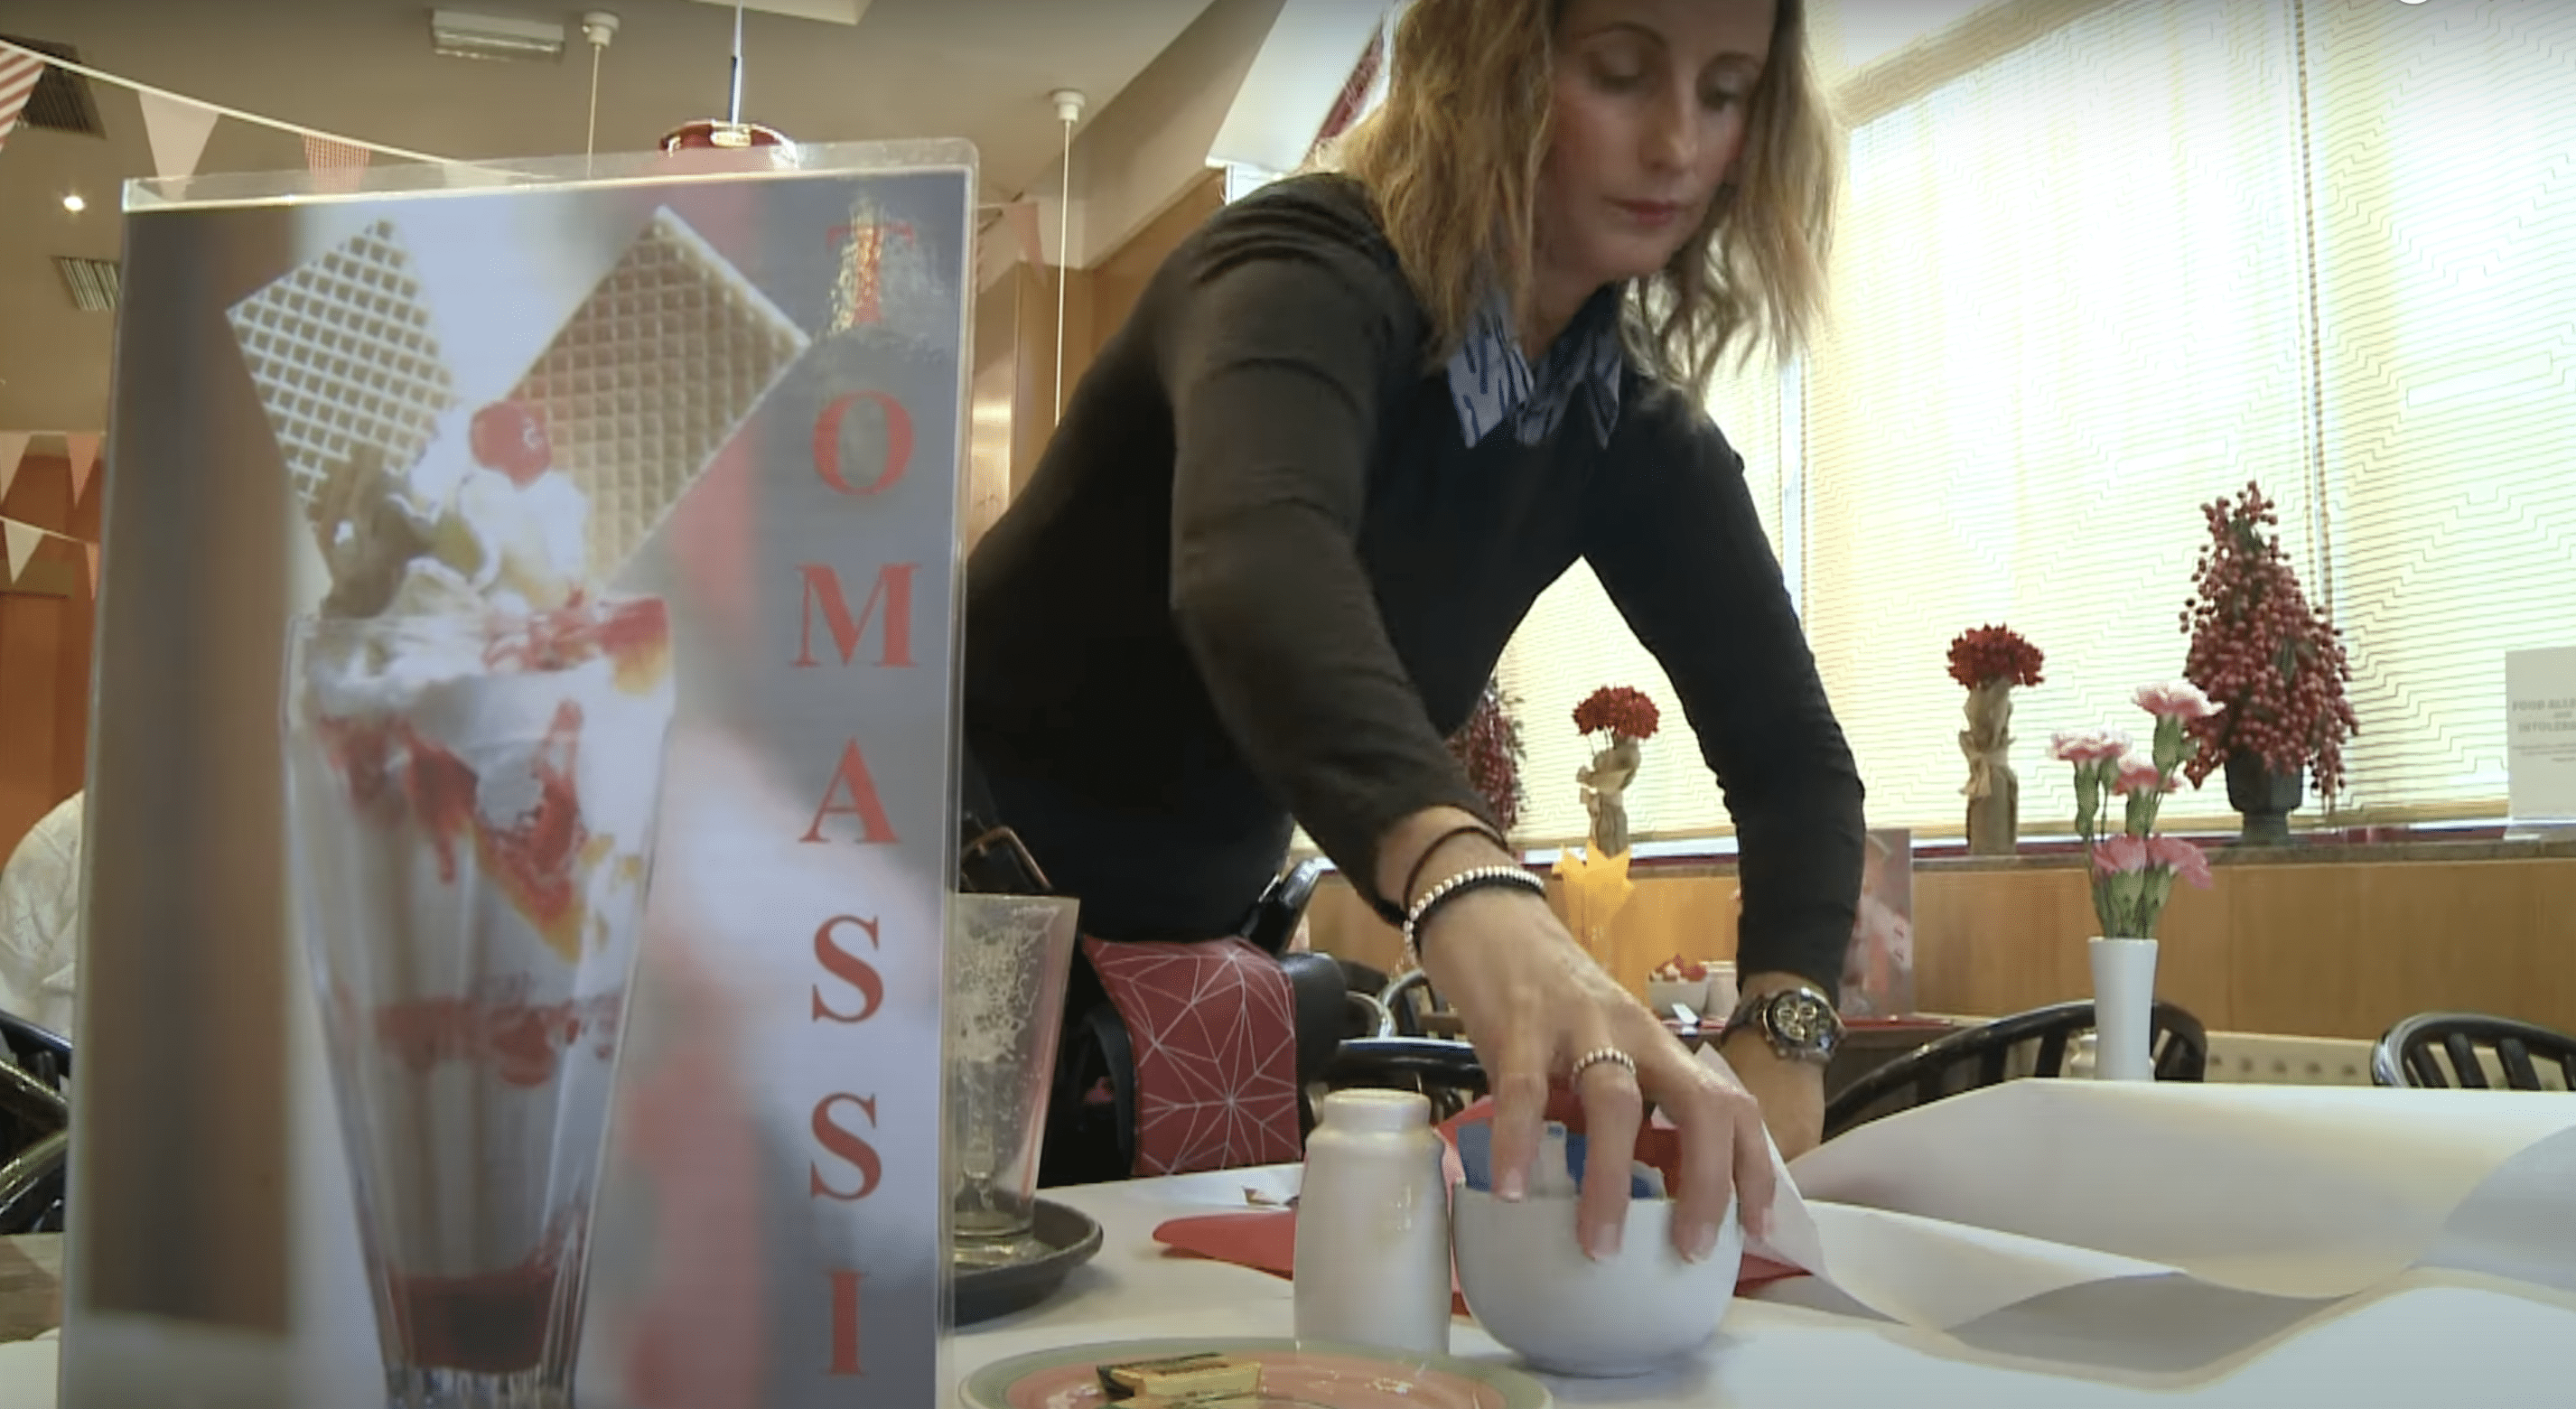 Congrave pictured setting up a table at Tomassi's.  |  Source: YouTube.com/On Demand News